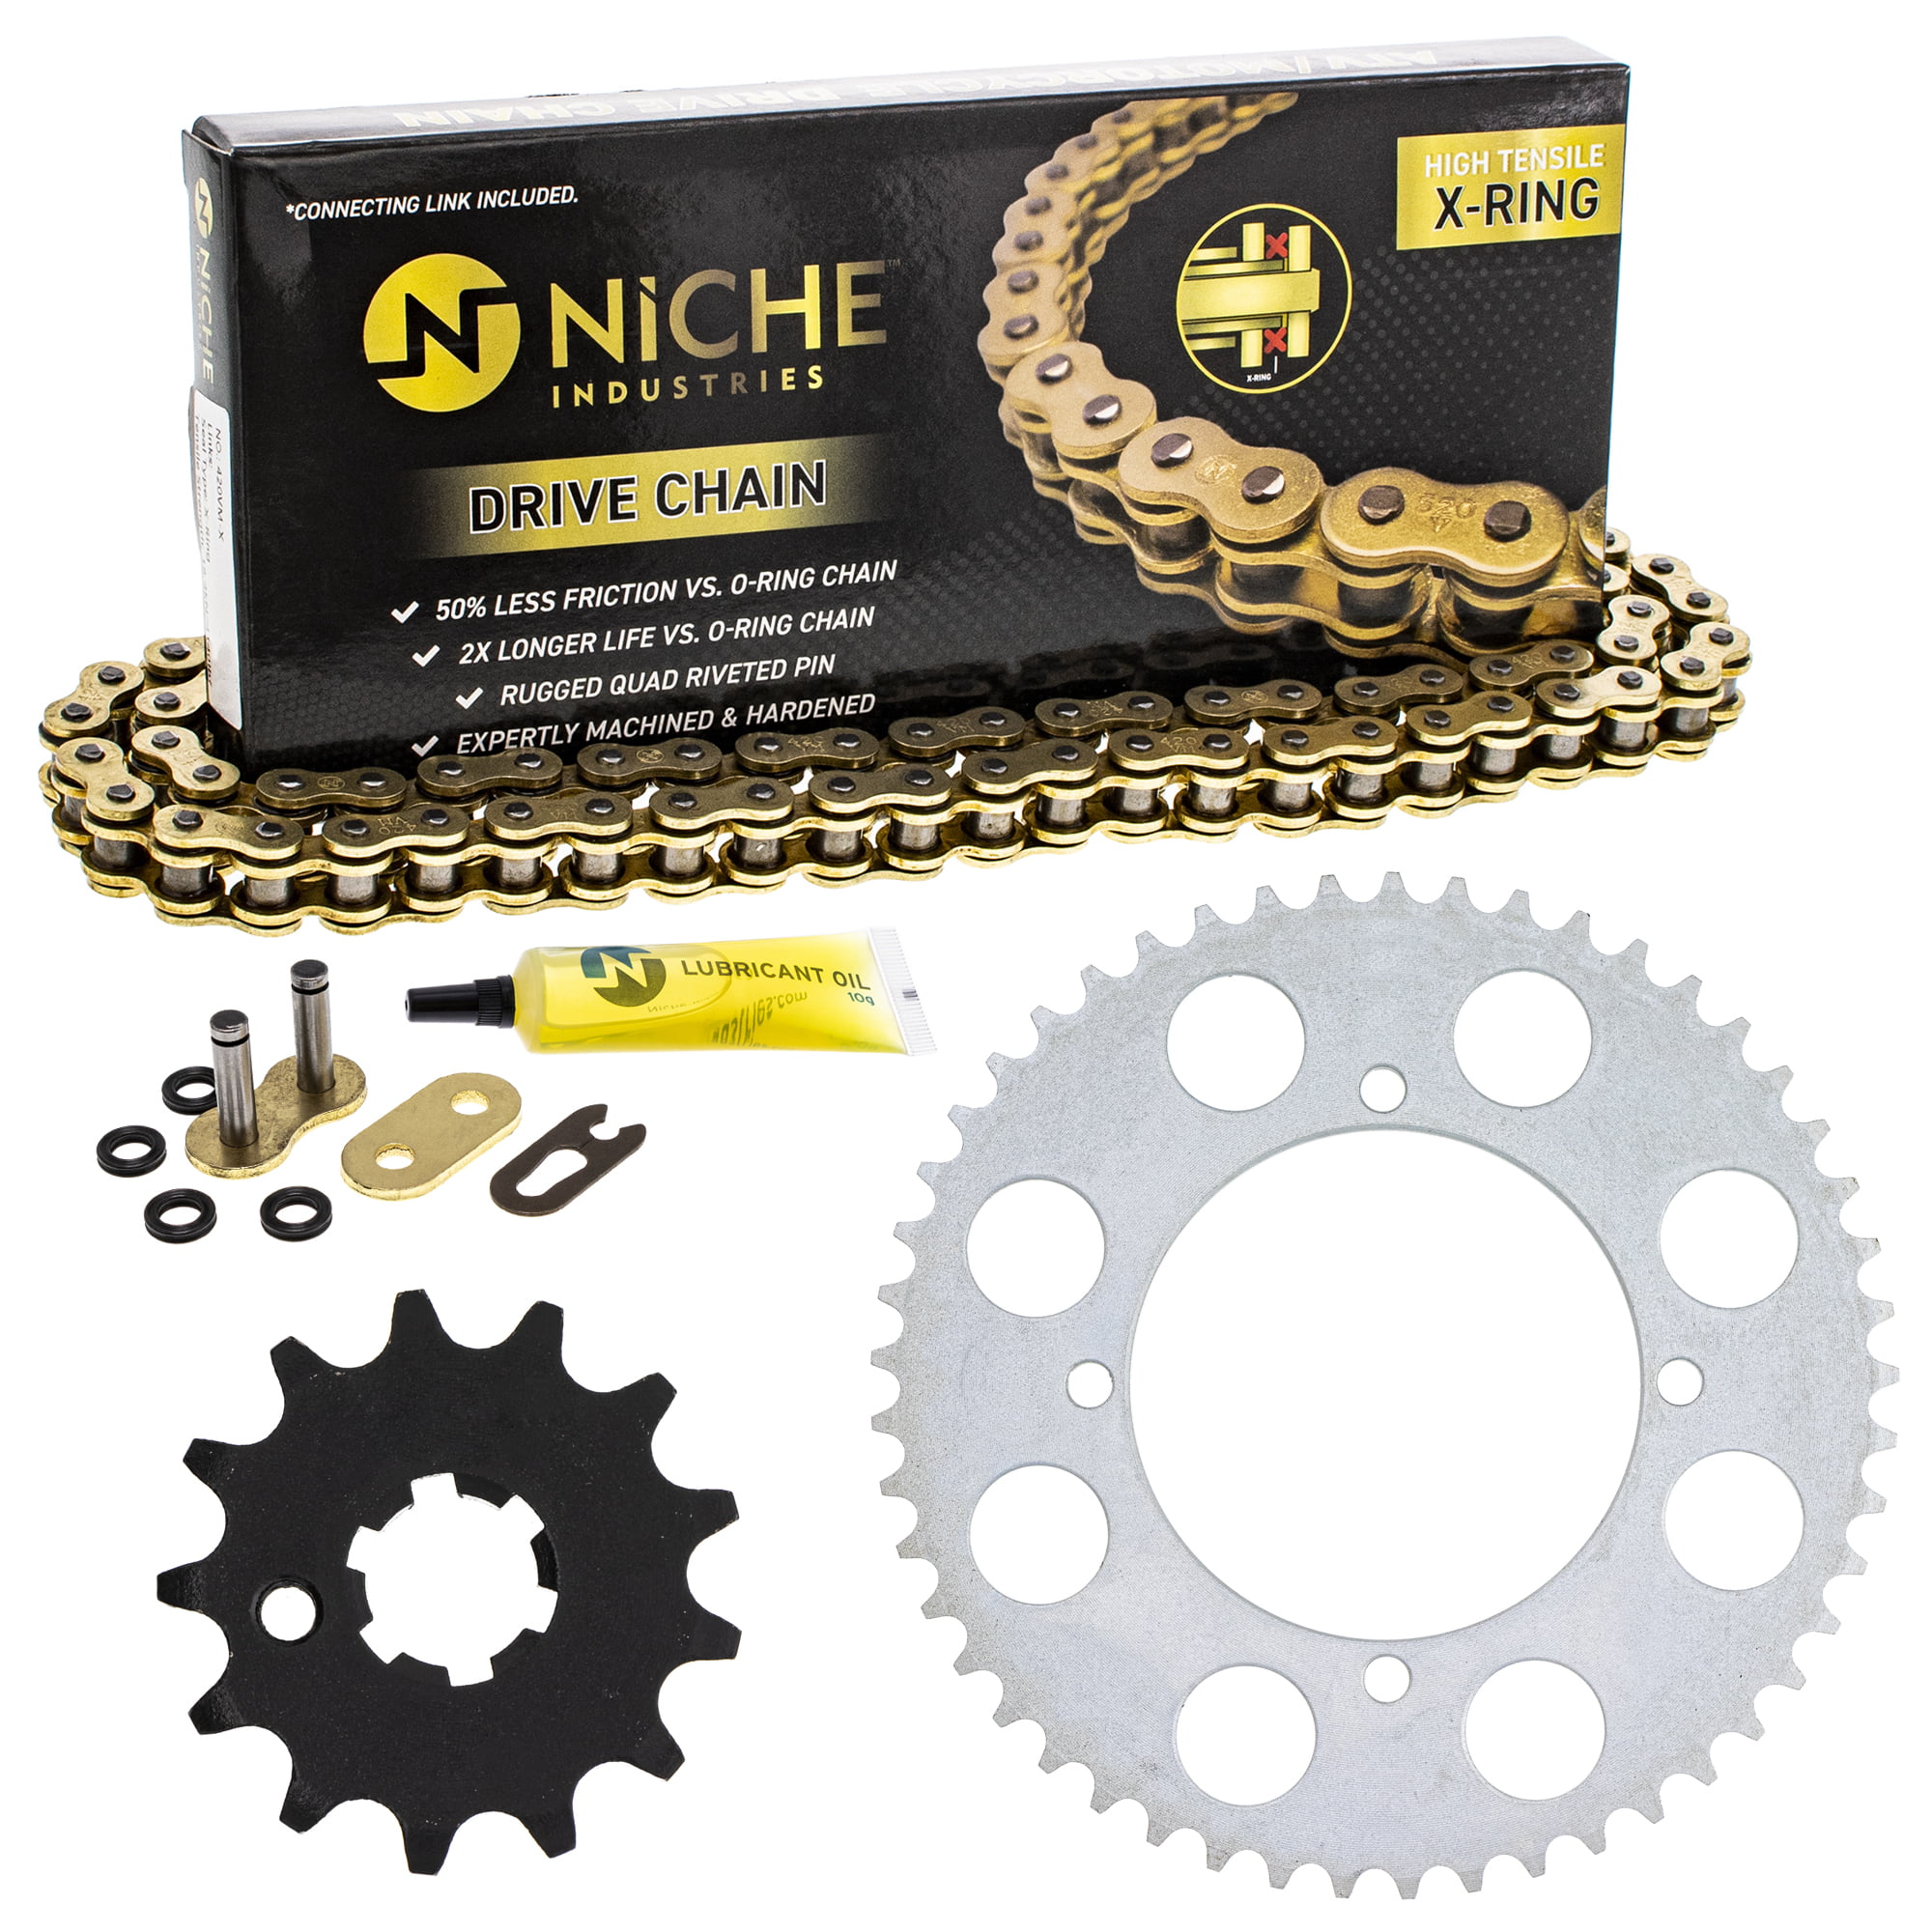 NICHE 420 Drive Chain 128 Links O-Ring With Connecting Master Link for Motorcycle ATV Dirt Bike 